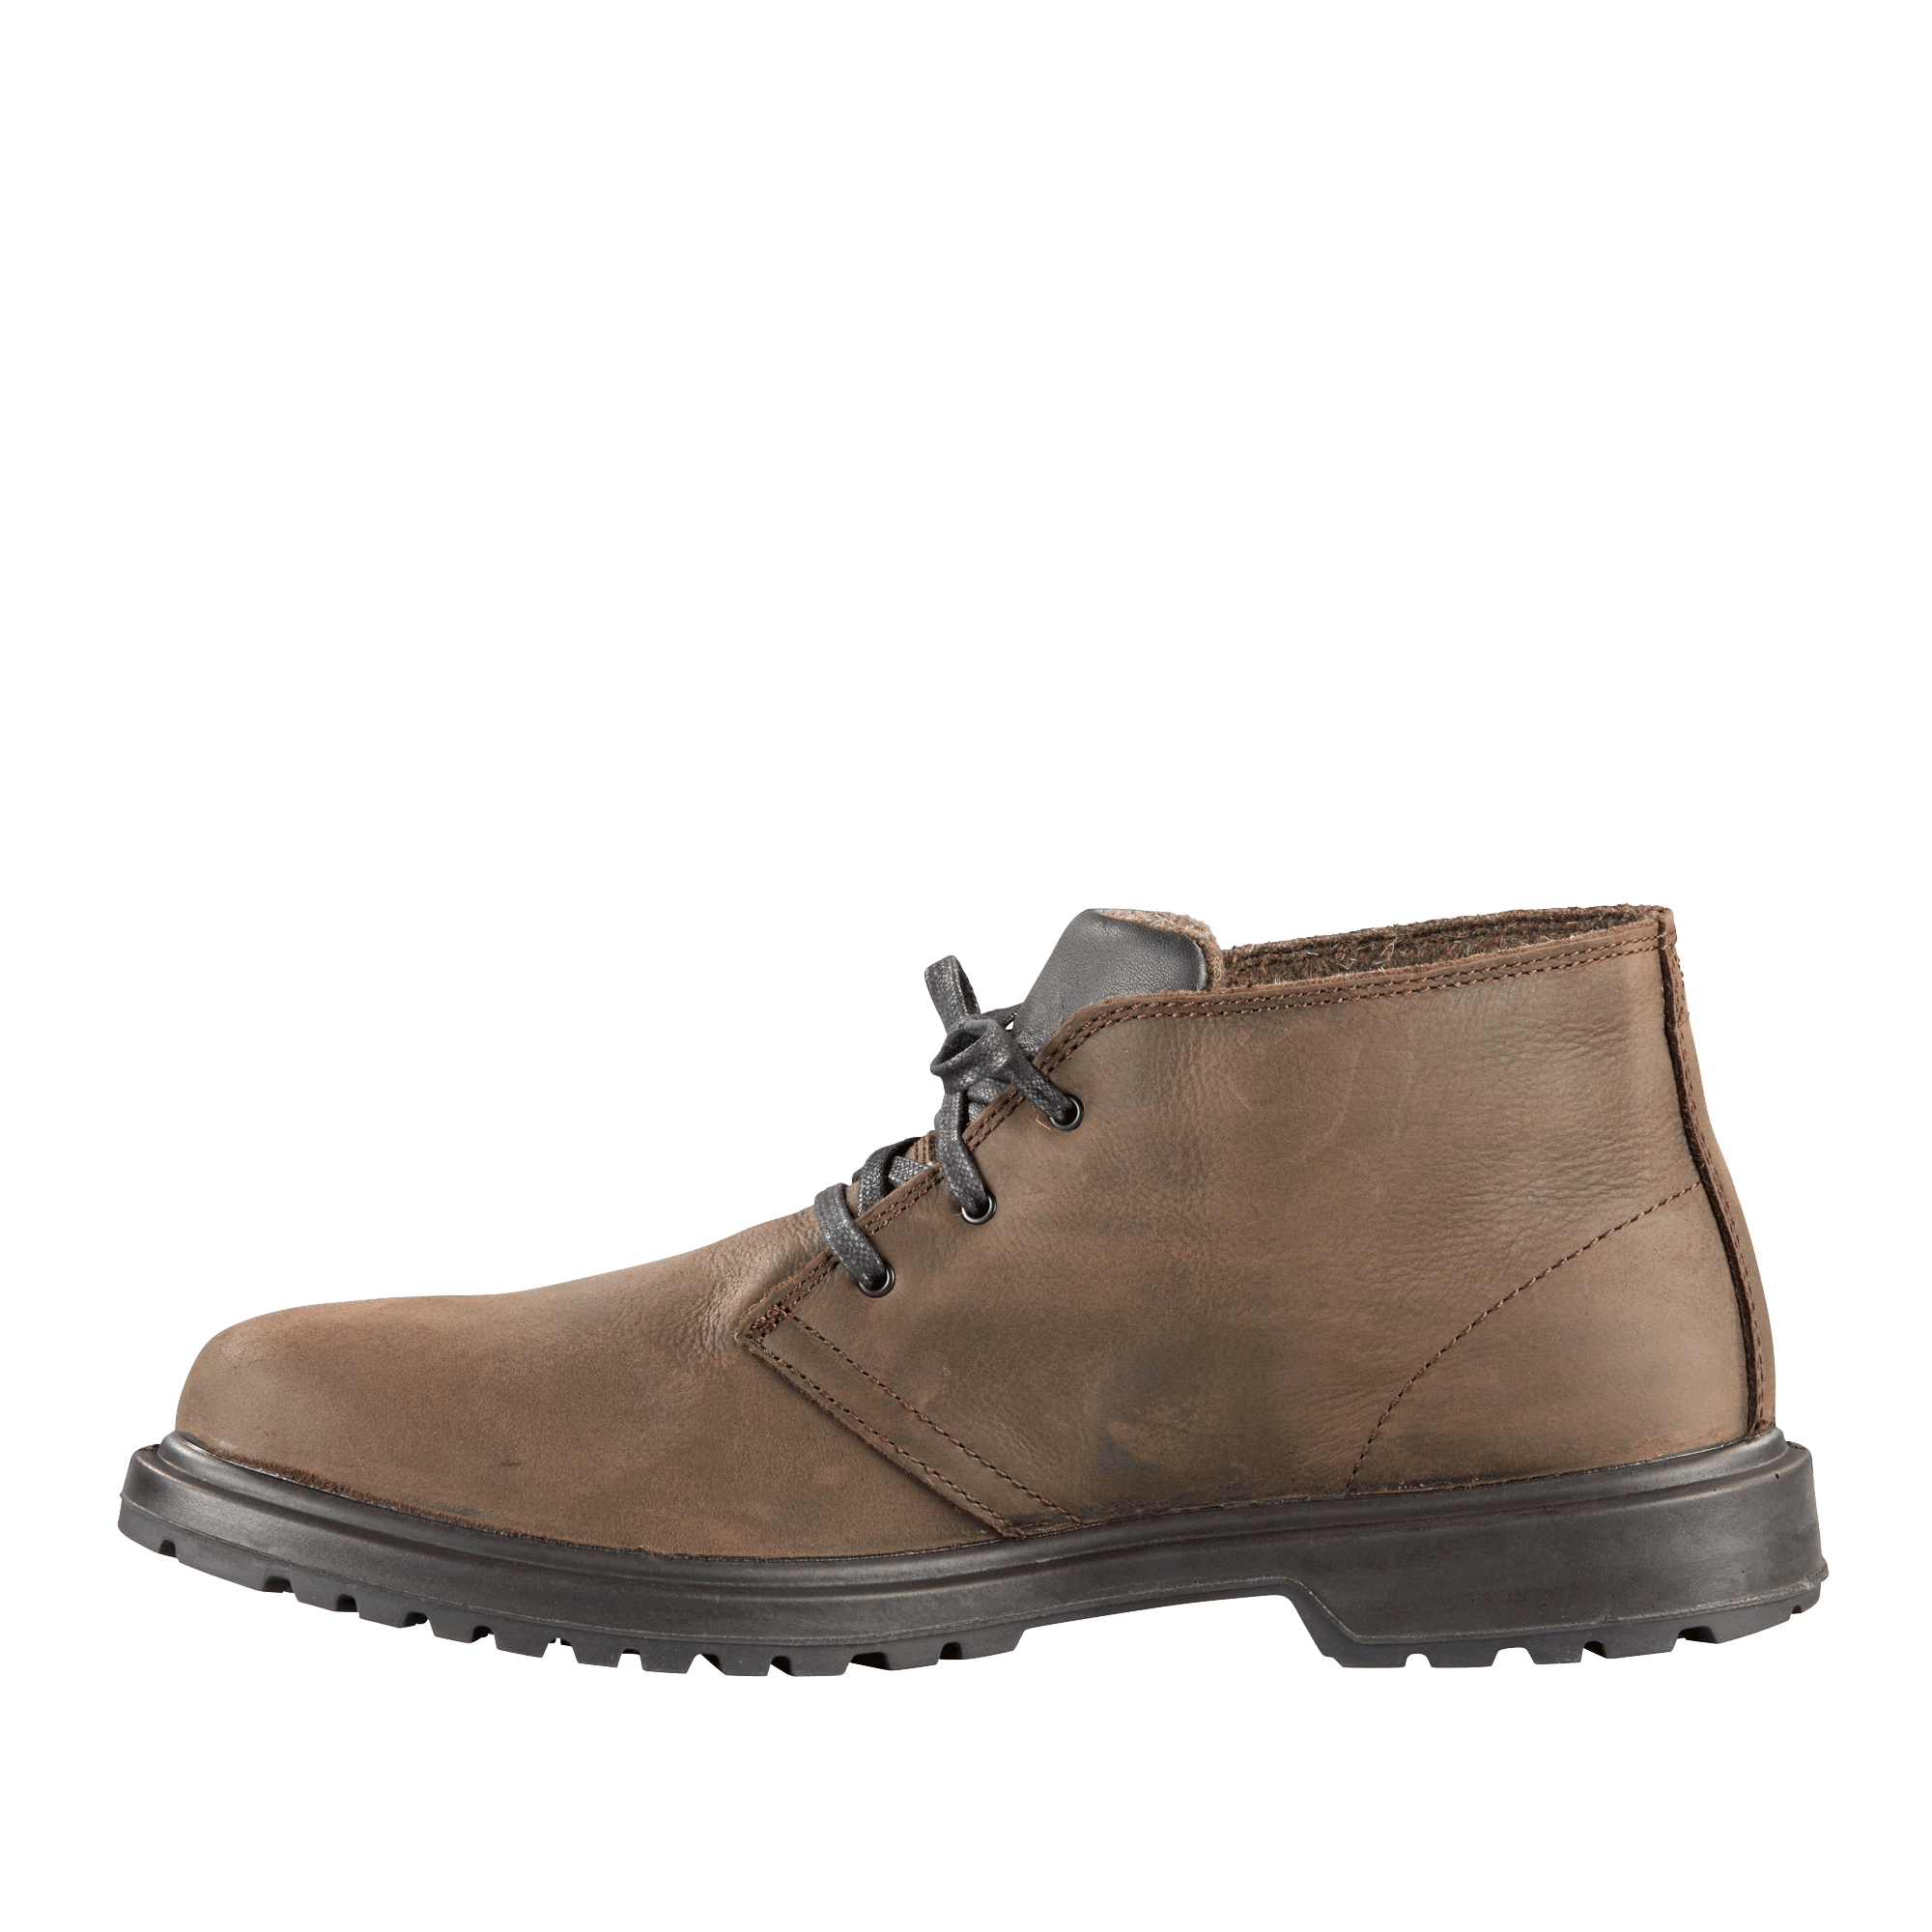 SOUTHERN | Men's Boot